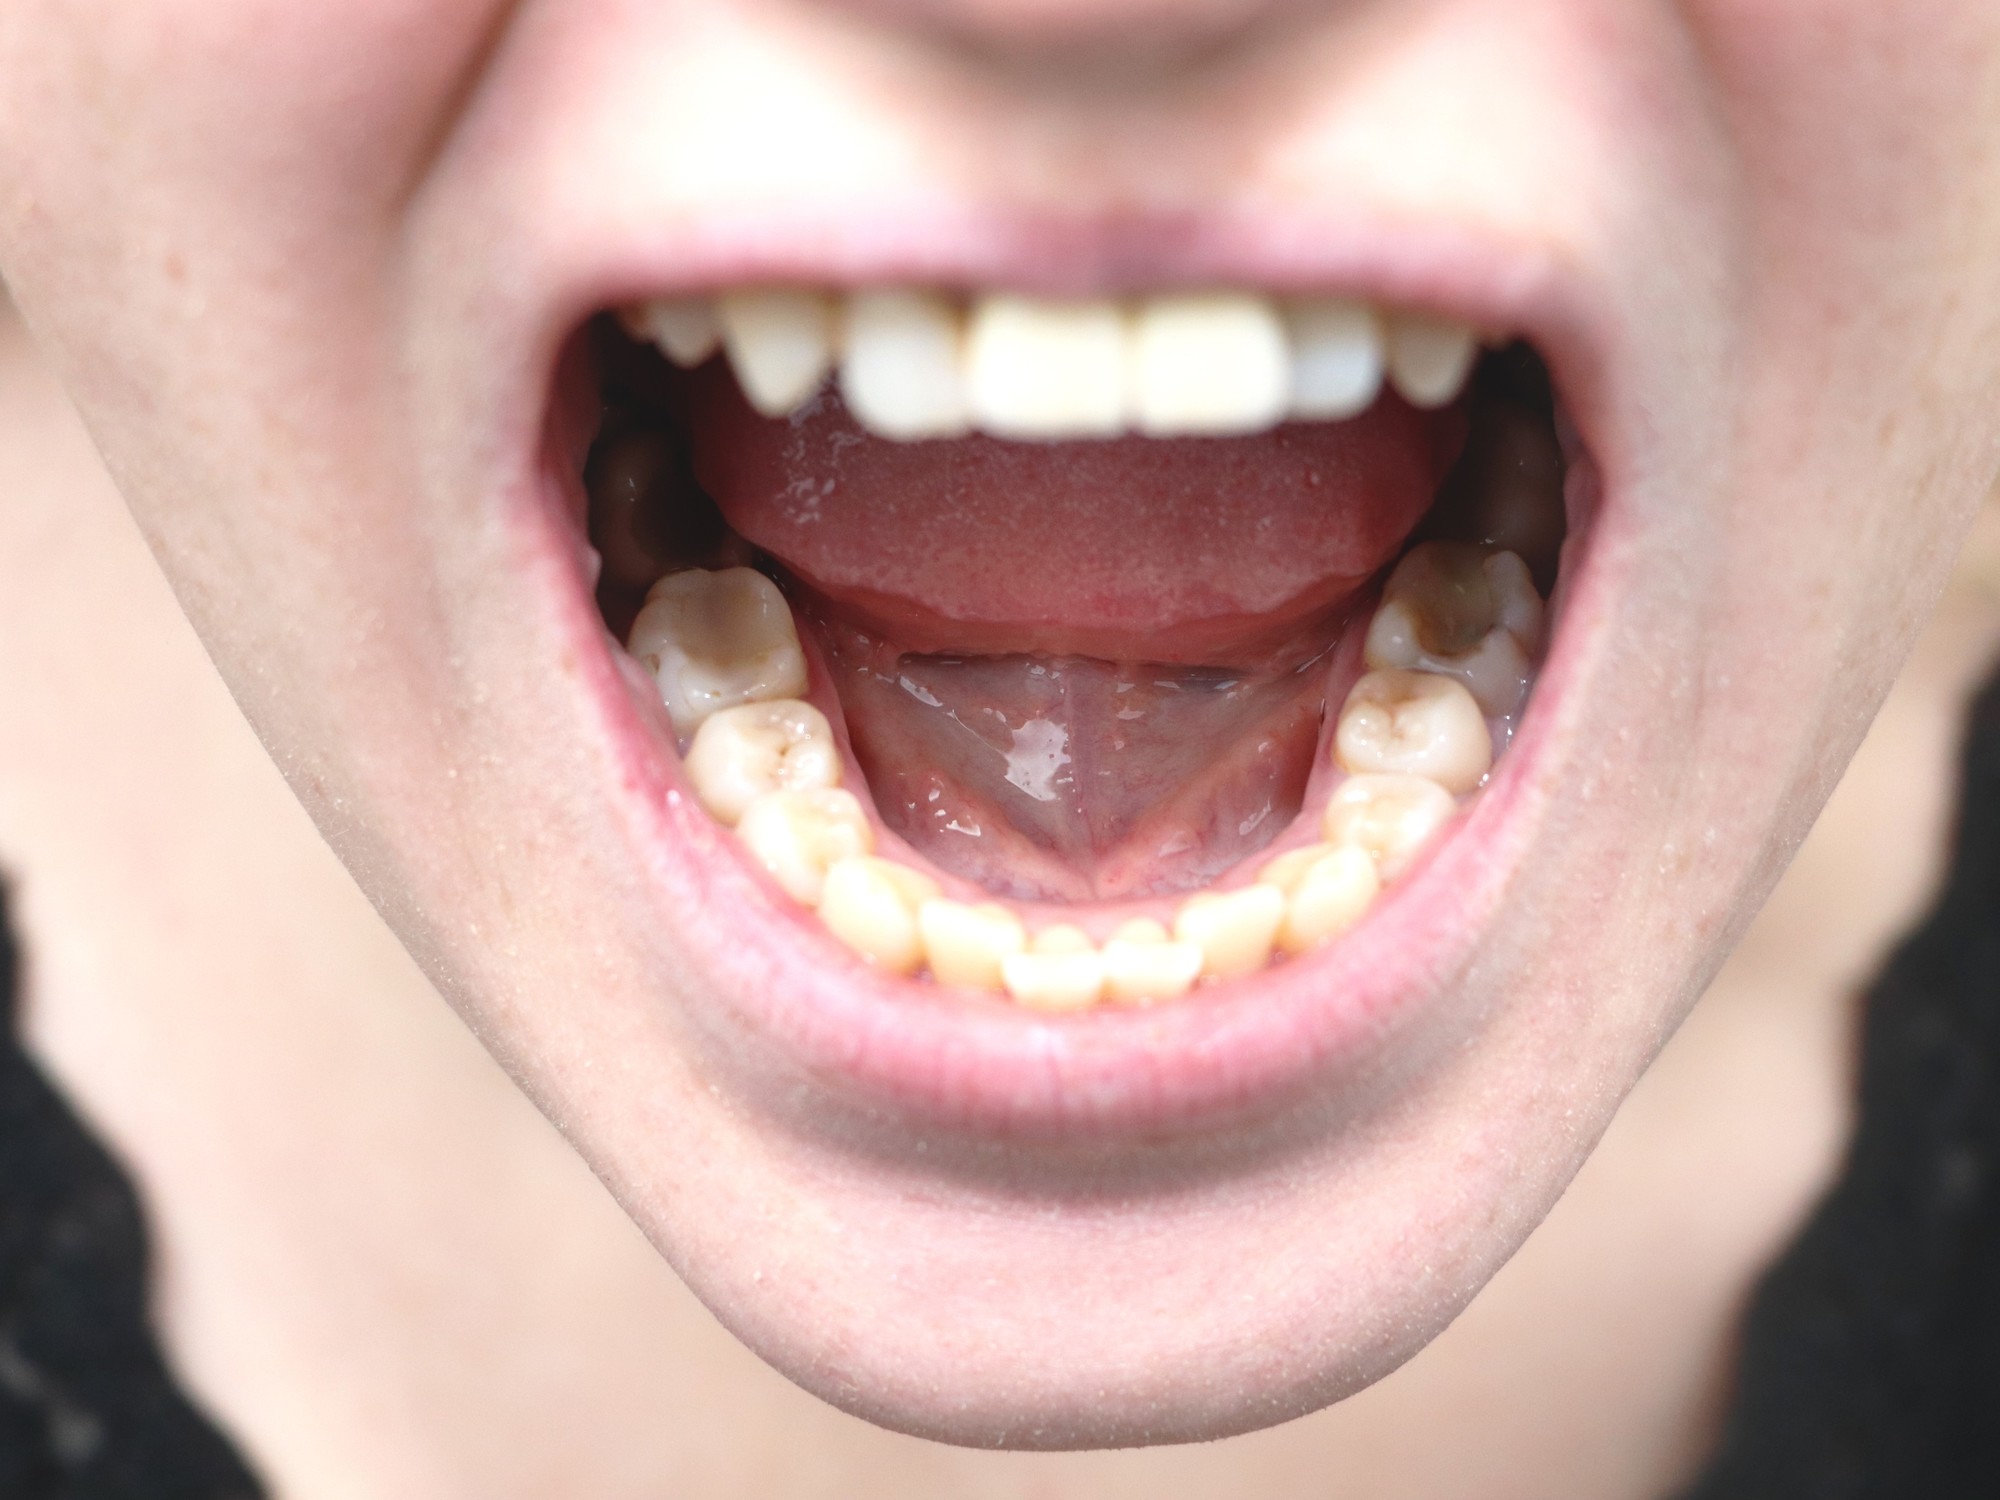 What signs in the mouth and throat should not be ignored?